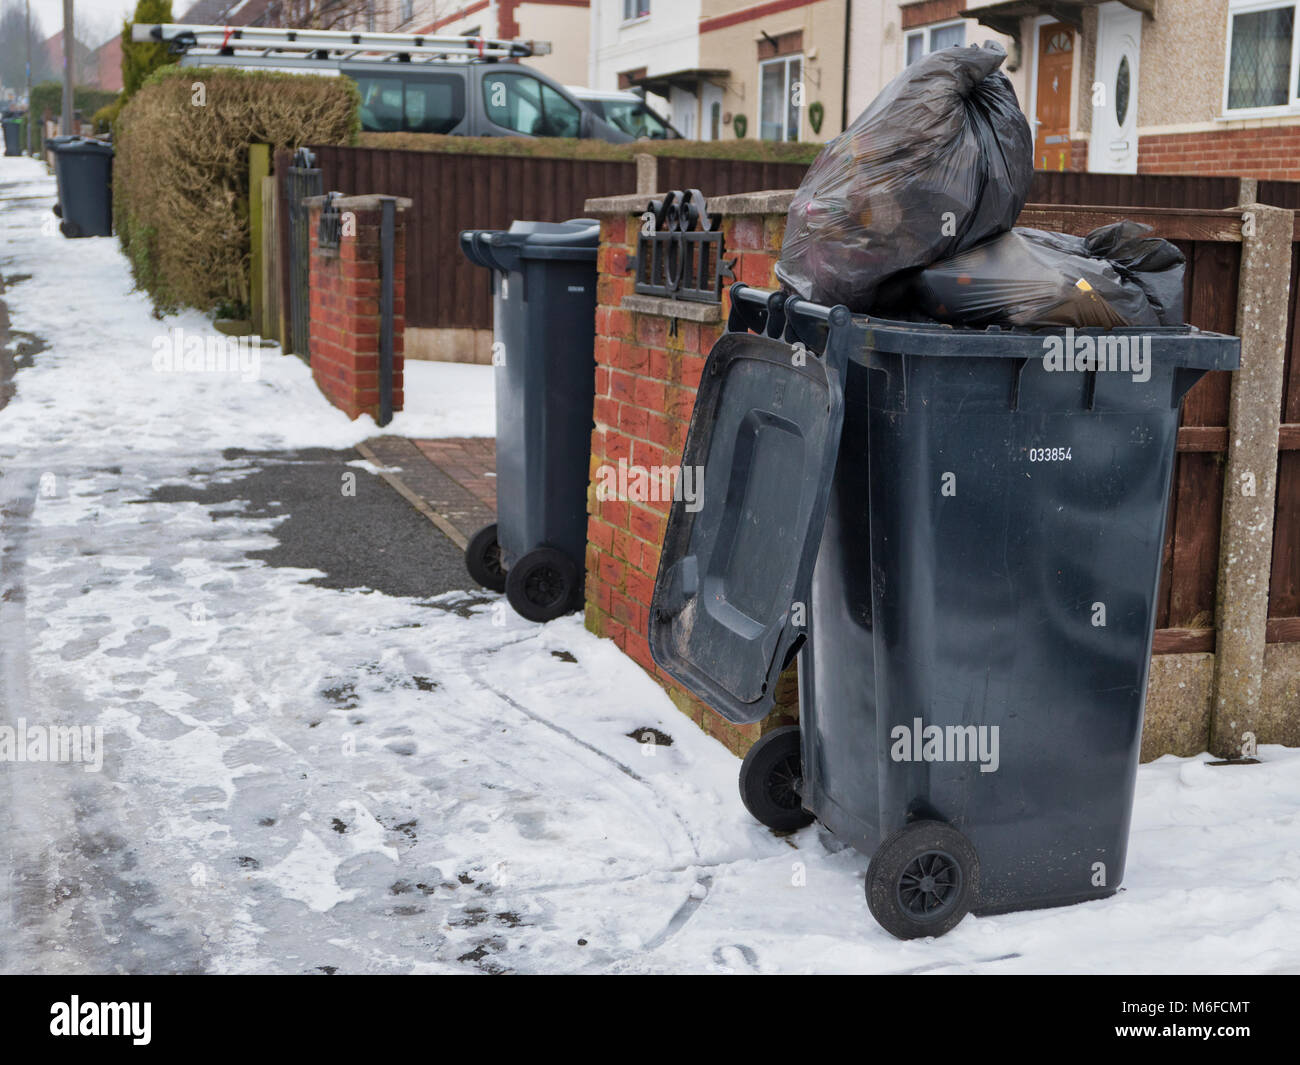 Ashourne, Derbyshire. 3rd March 2018. UK Weather: overflowing bins from Thursday awaiting collection by Derbyshire Dales District Council as they catch up on bin collections after the cold snowy weather in Ashbourne, Derbyshire, England, UK Credit: Doug Blane/Alamy Live News Stock Photo